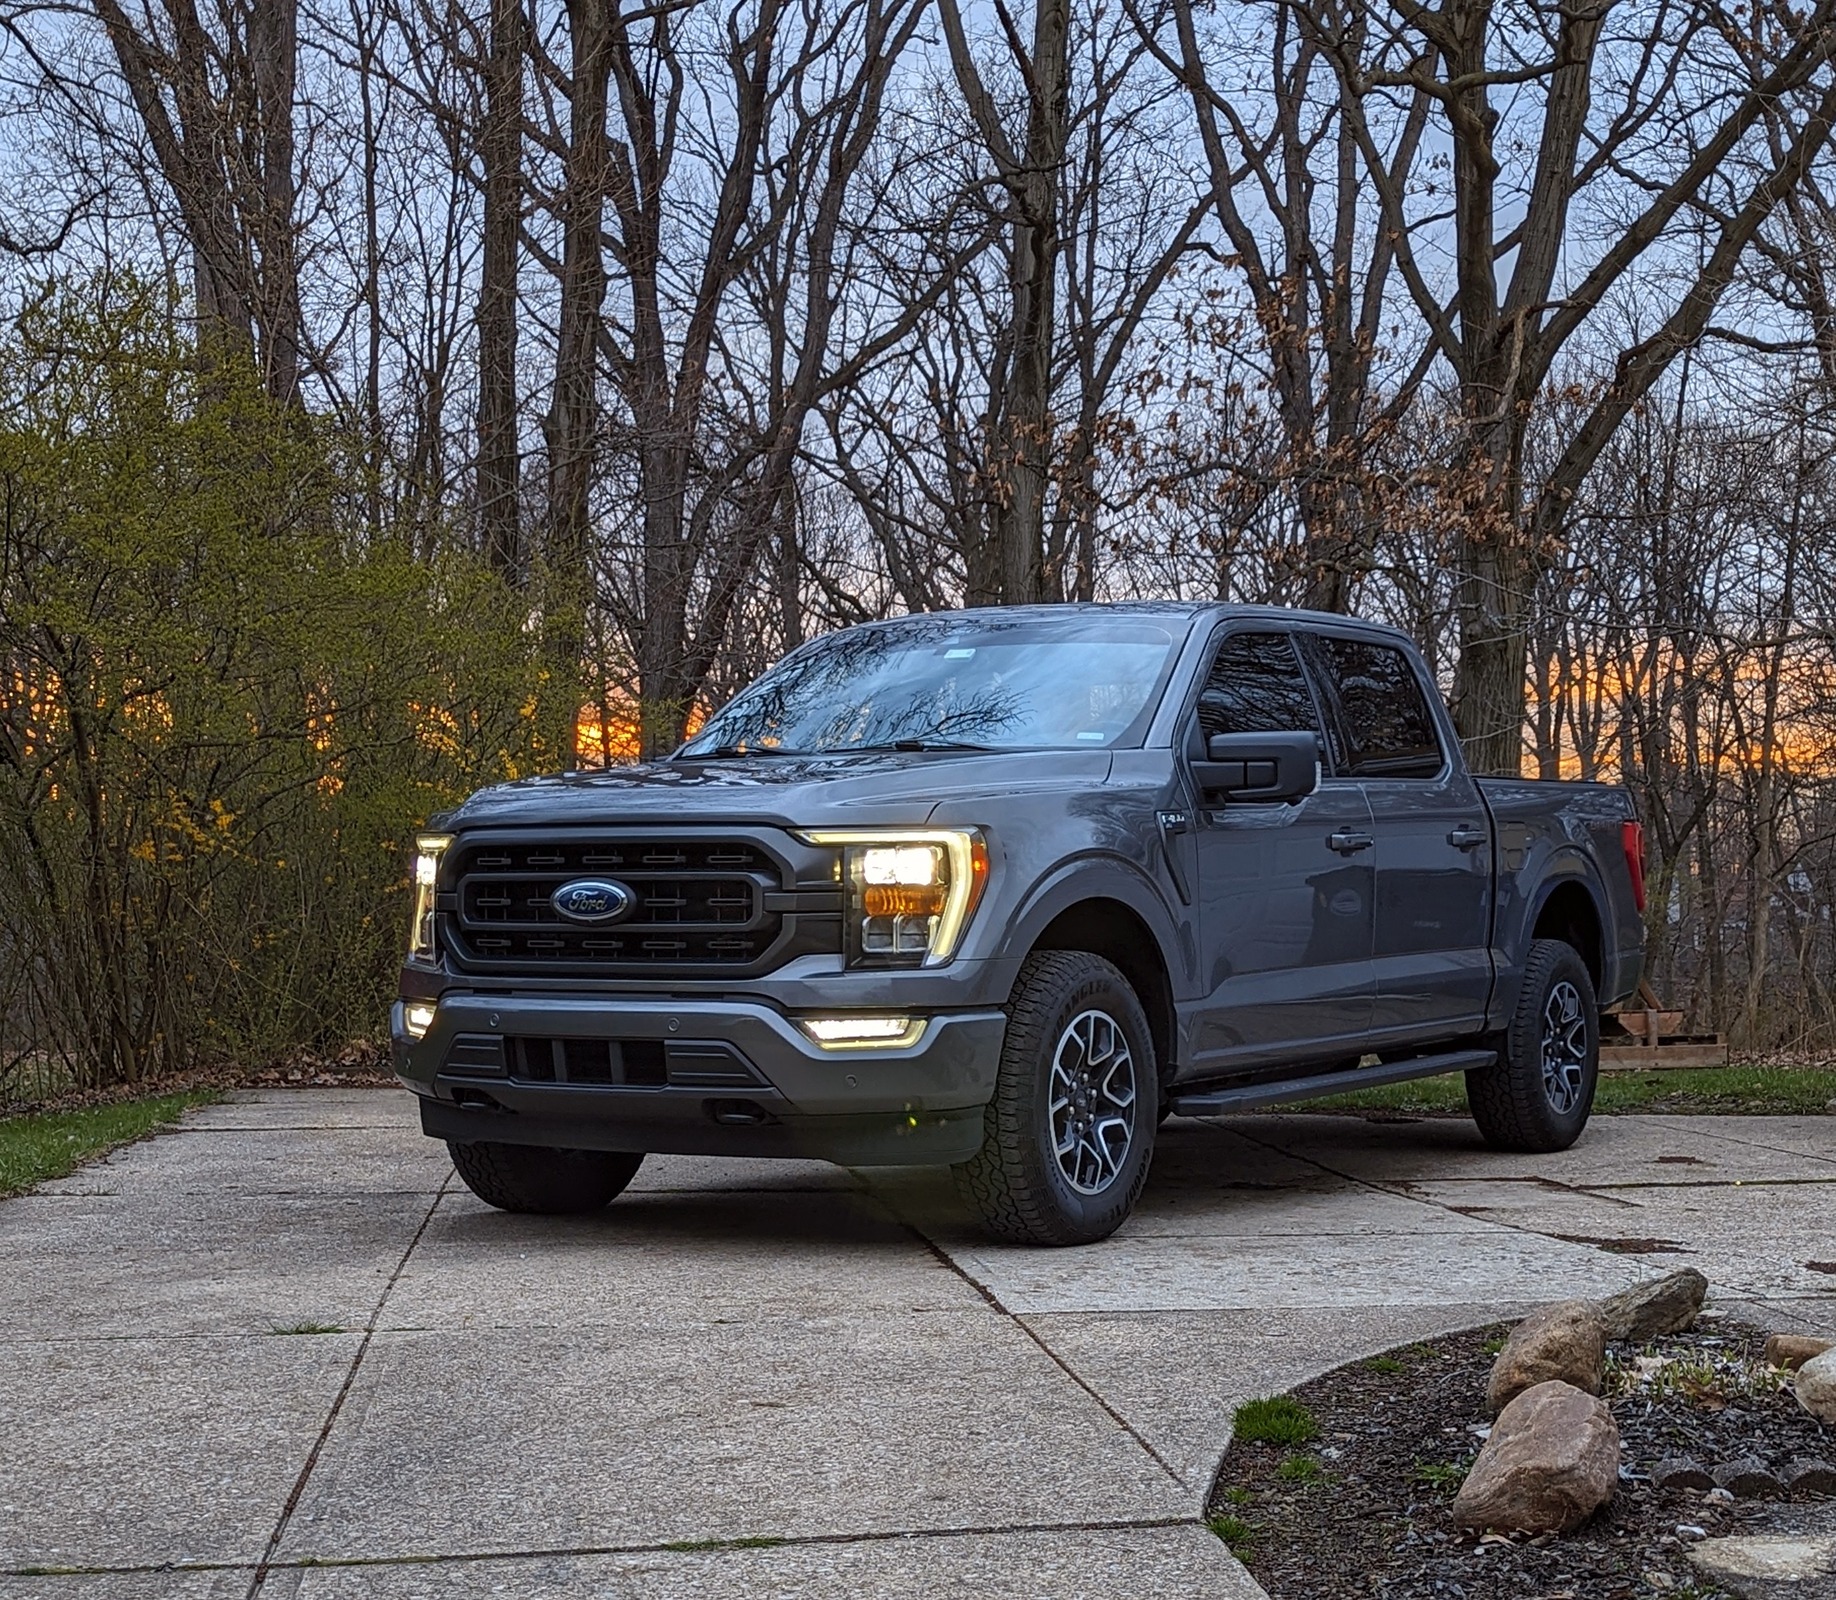 Ford F-150 Random F-150 Photos of the Day - Post Yours! 📸 🤳 1000009103